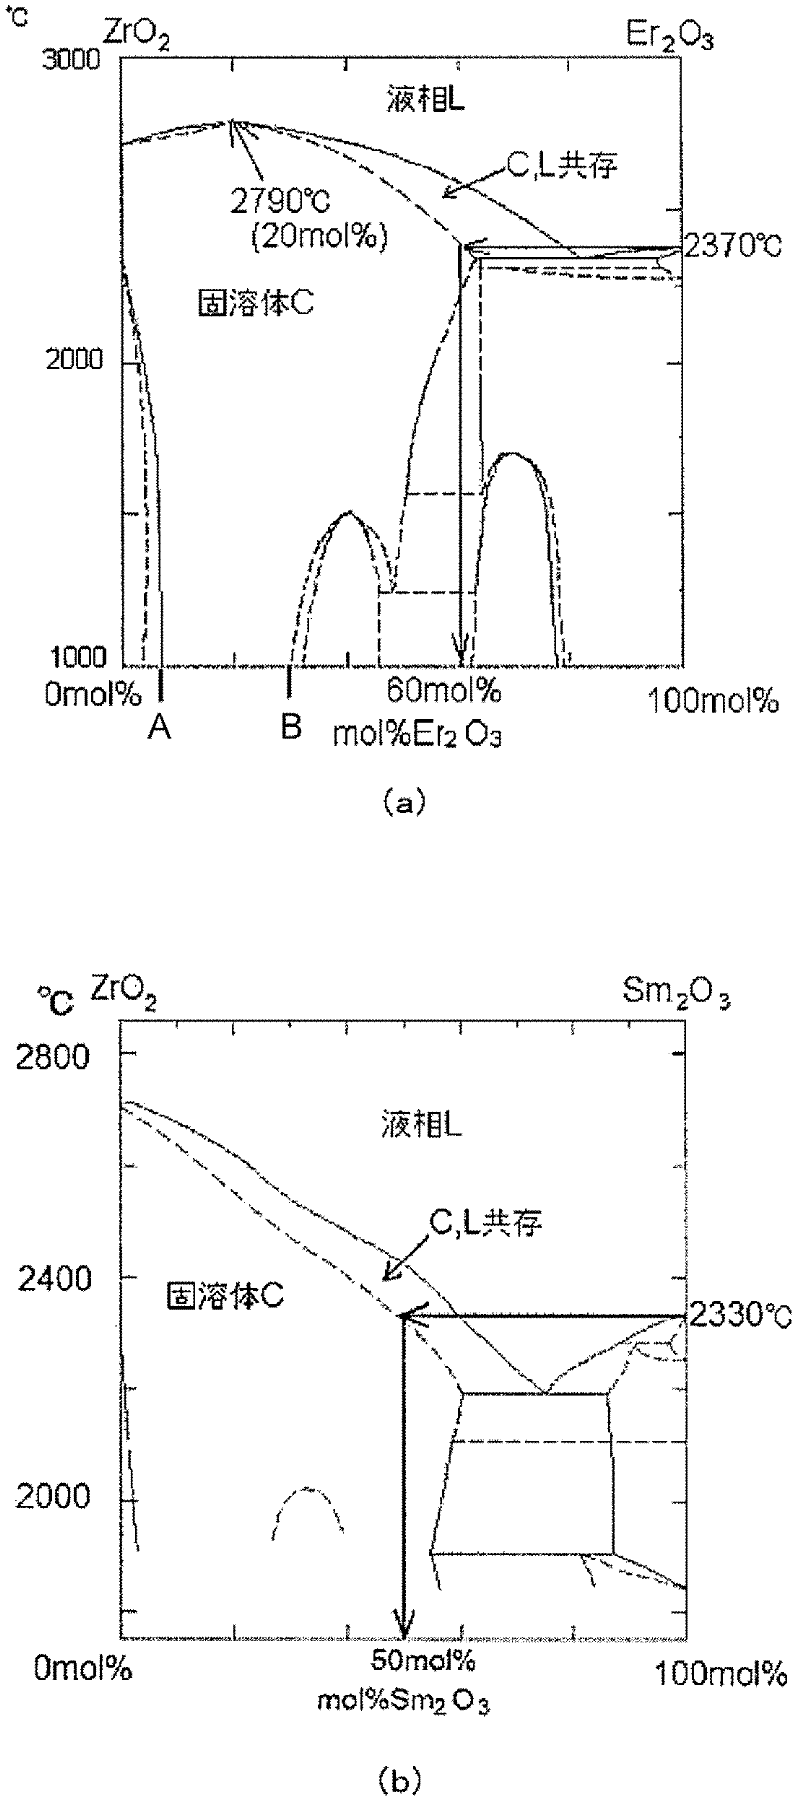 Tungsten electrode material and thermal electron emission current measurement device